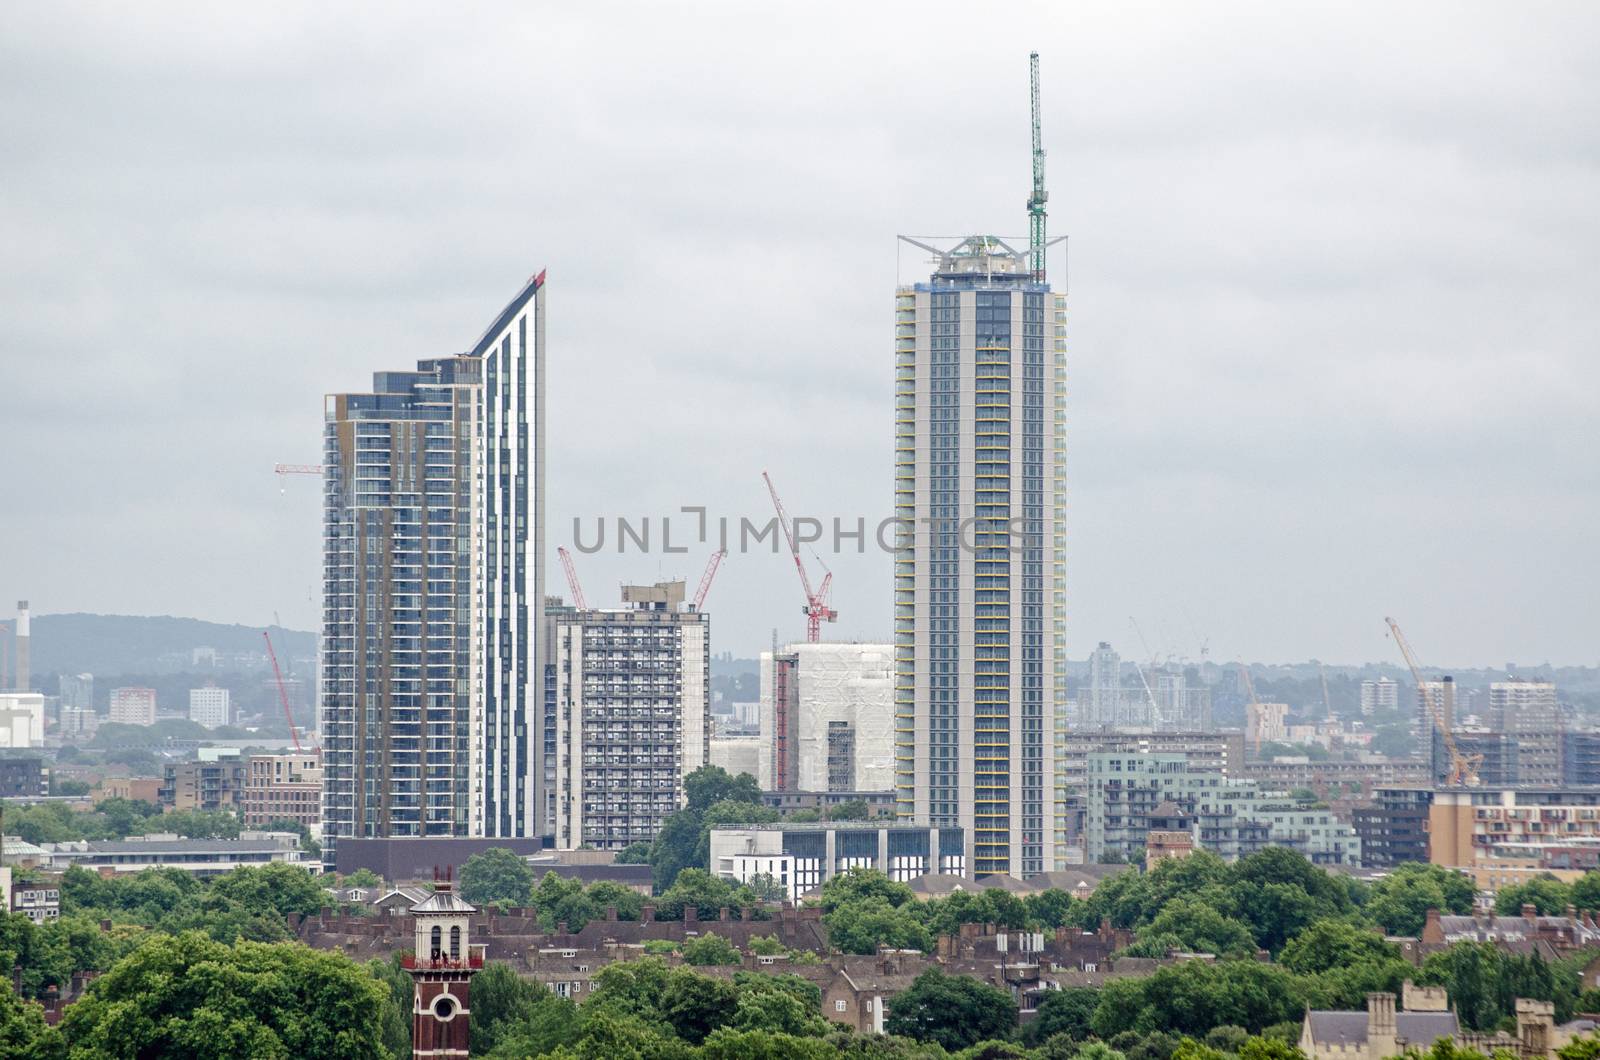 New Tower Block Flats, Elephant and Castle by BasPhoto